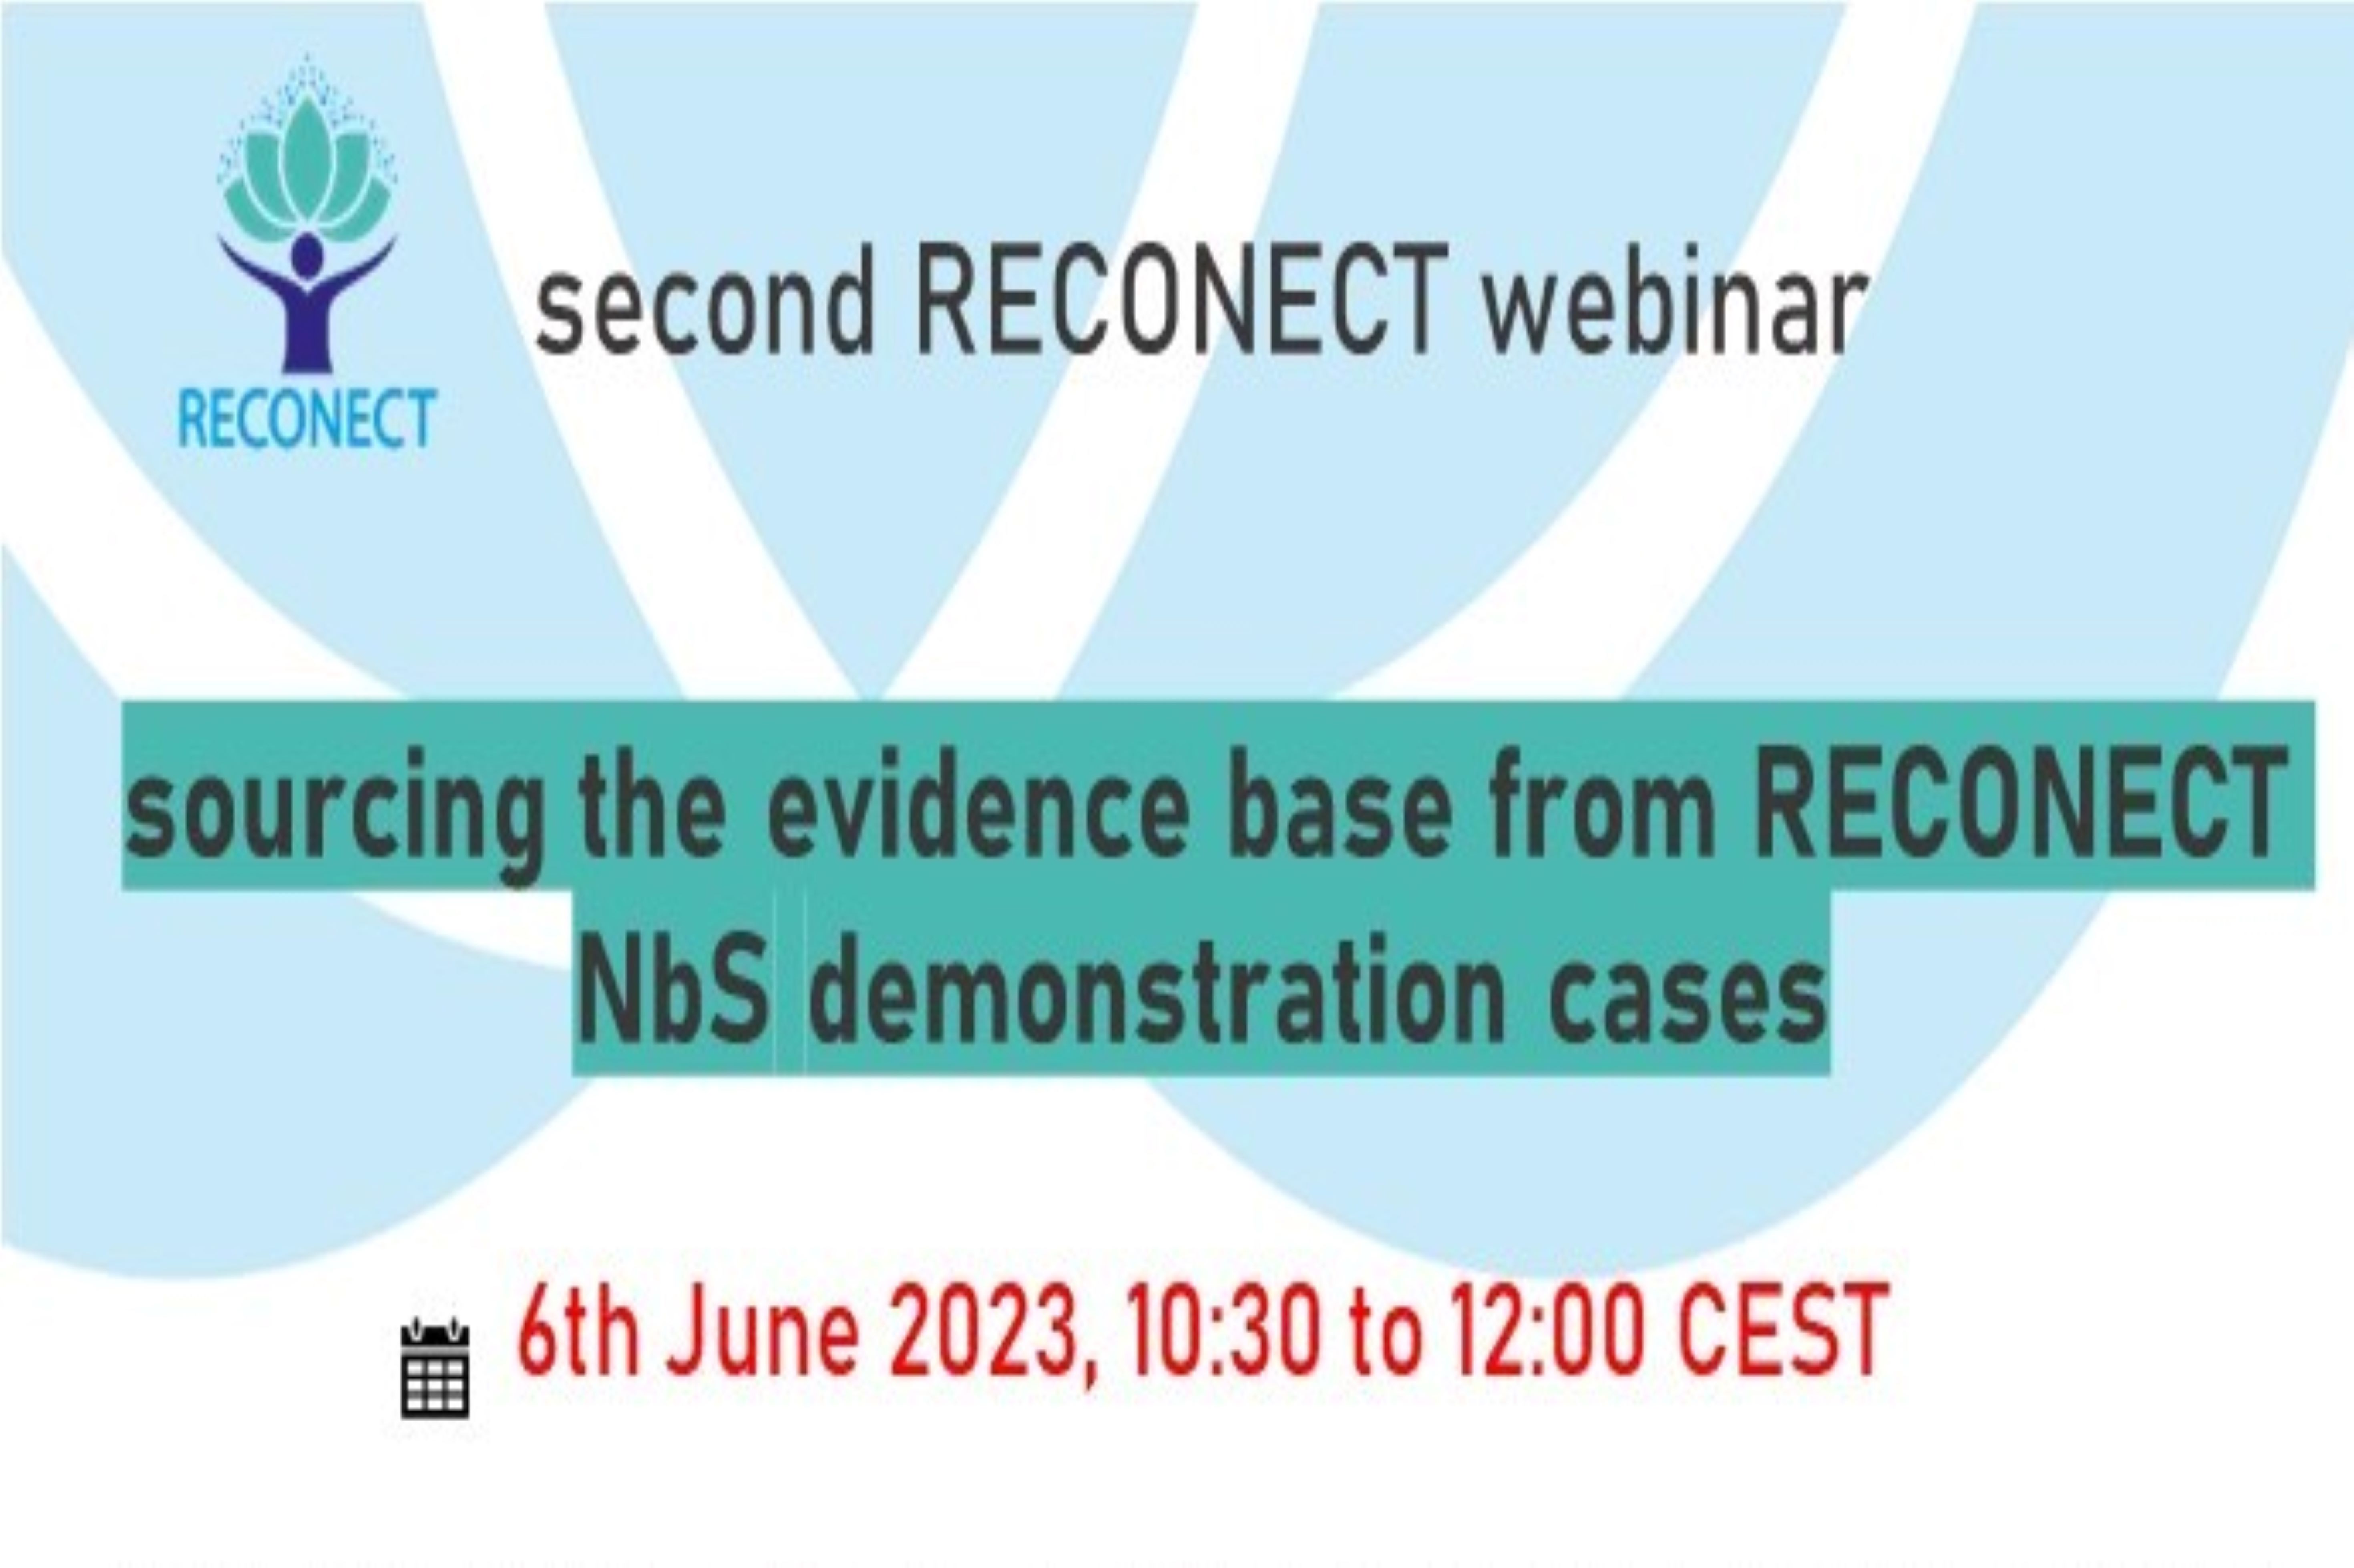 Reconect webinar #2: Sourcing the evidence base from RECONECT NbS demonstration cases, 6.6.2023.